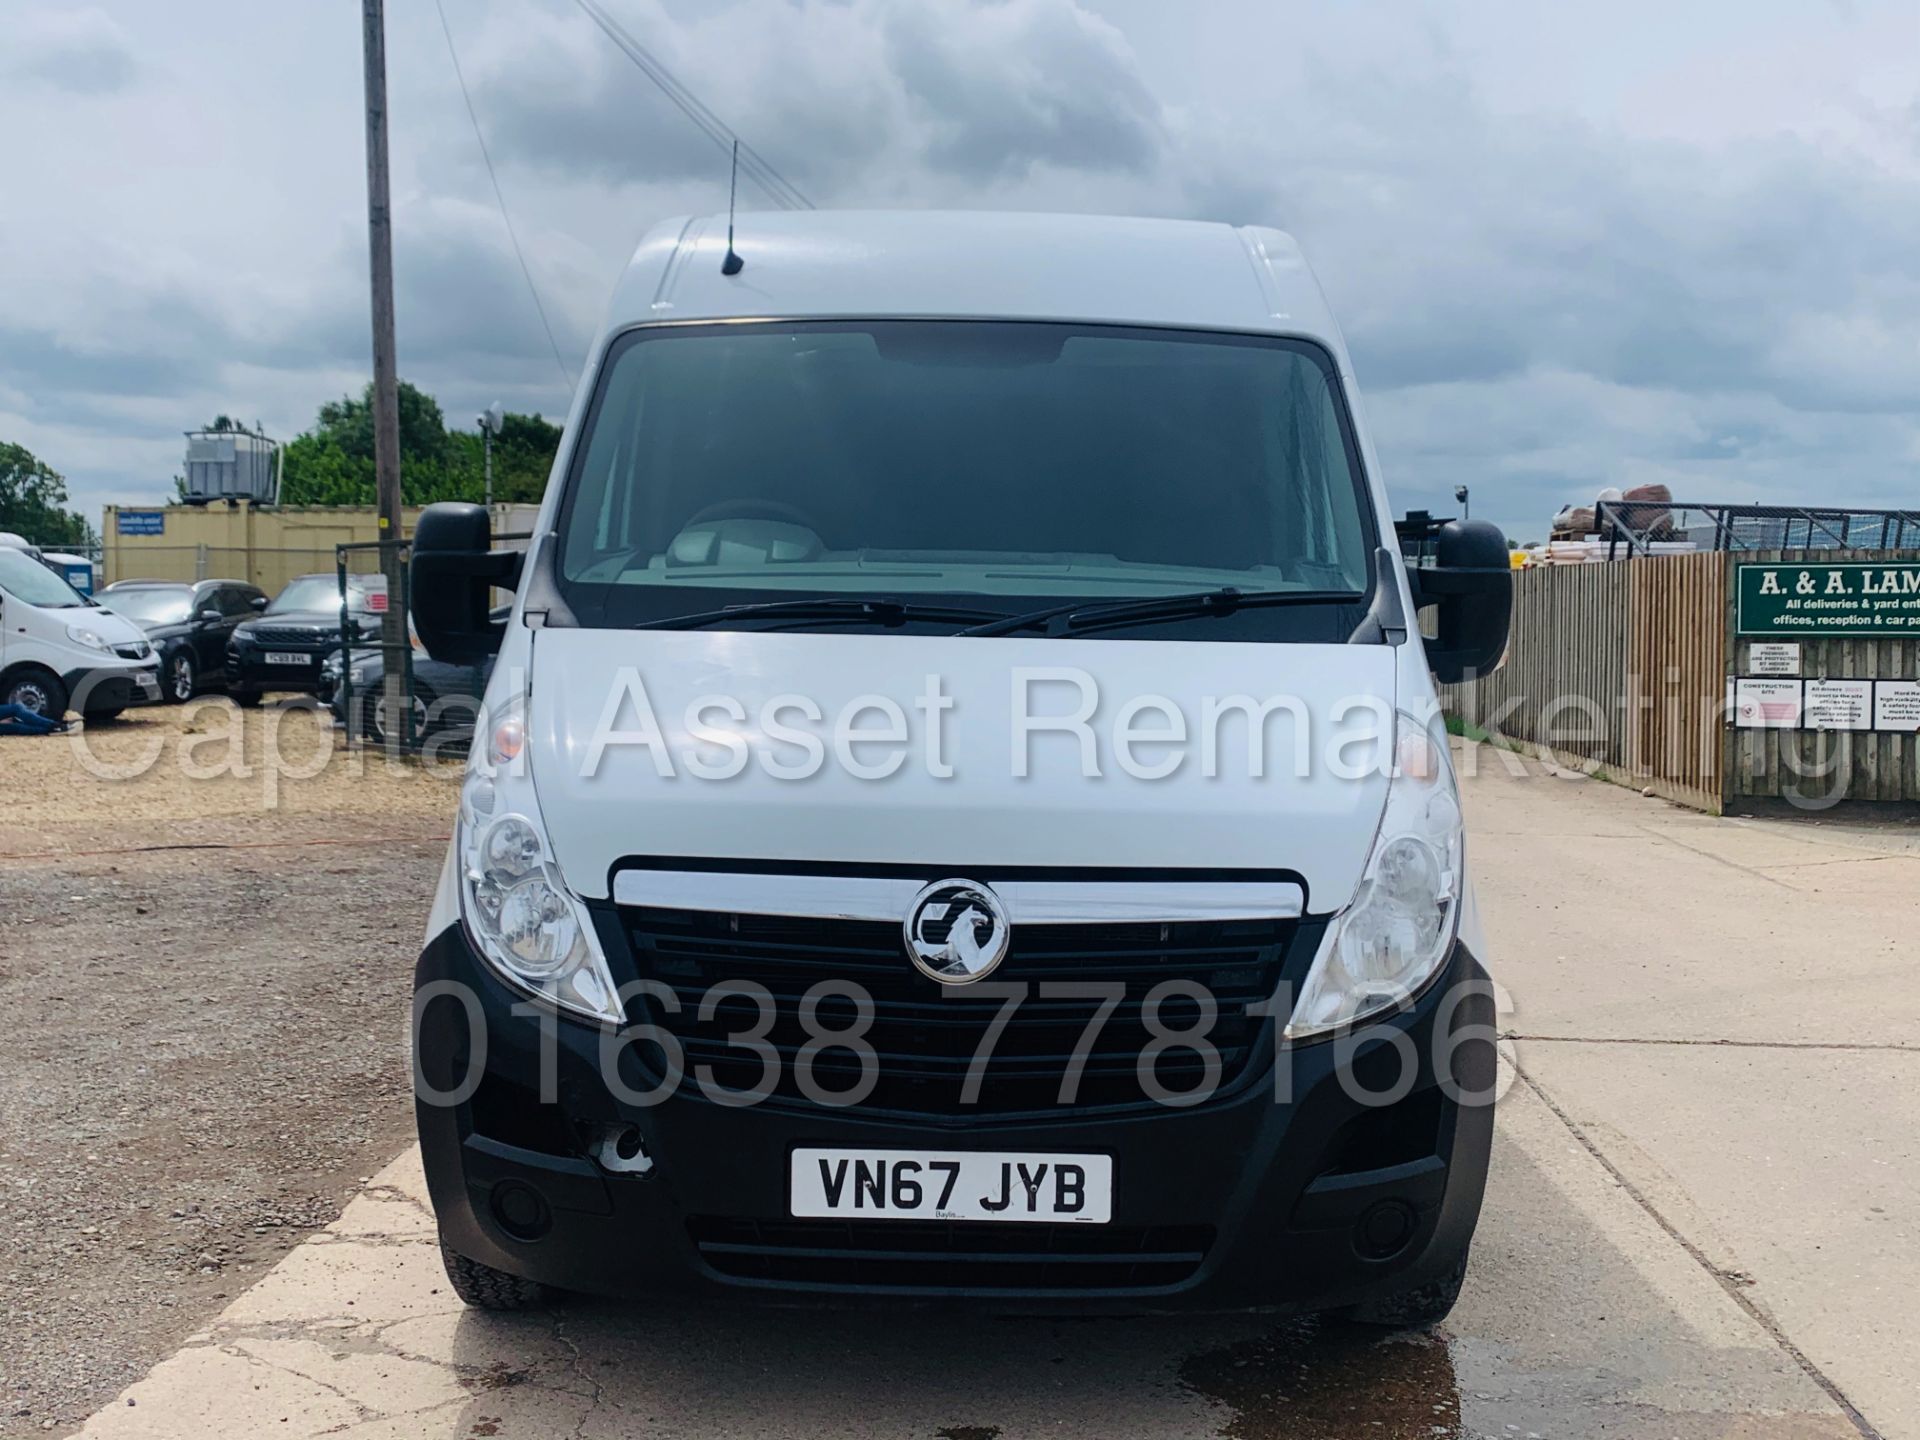 (ON SALE) VAUXHALL MOVANO *MWB HI-ROOF* (2018 - EURO 6) '2.3 CDTI - 130 BHP - 6 SPEED' (1 OWNER) - Image 4 of 39